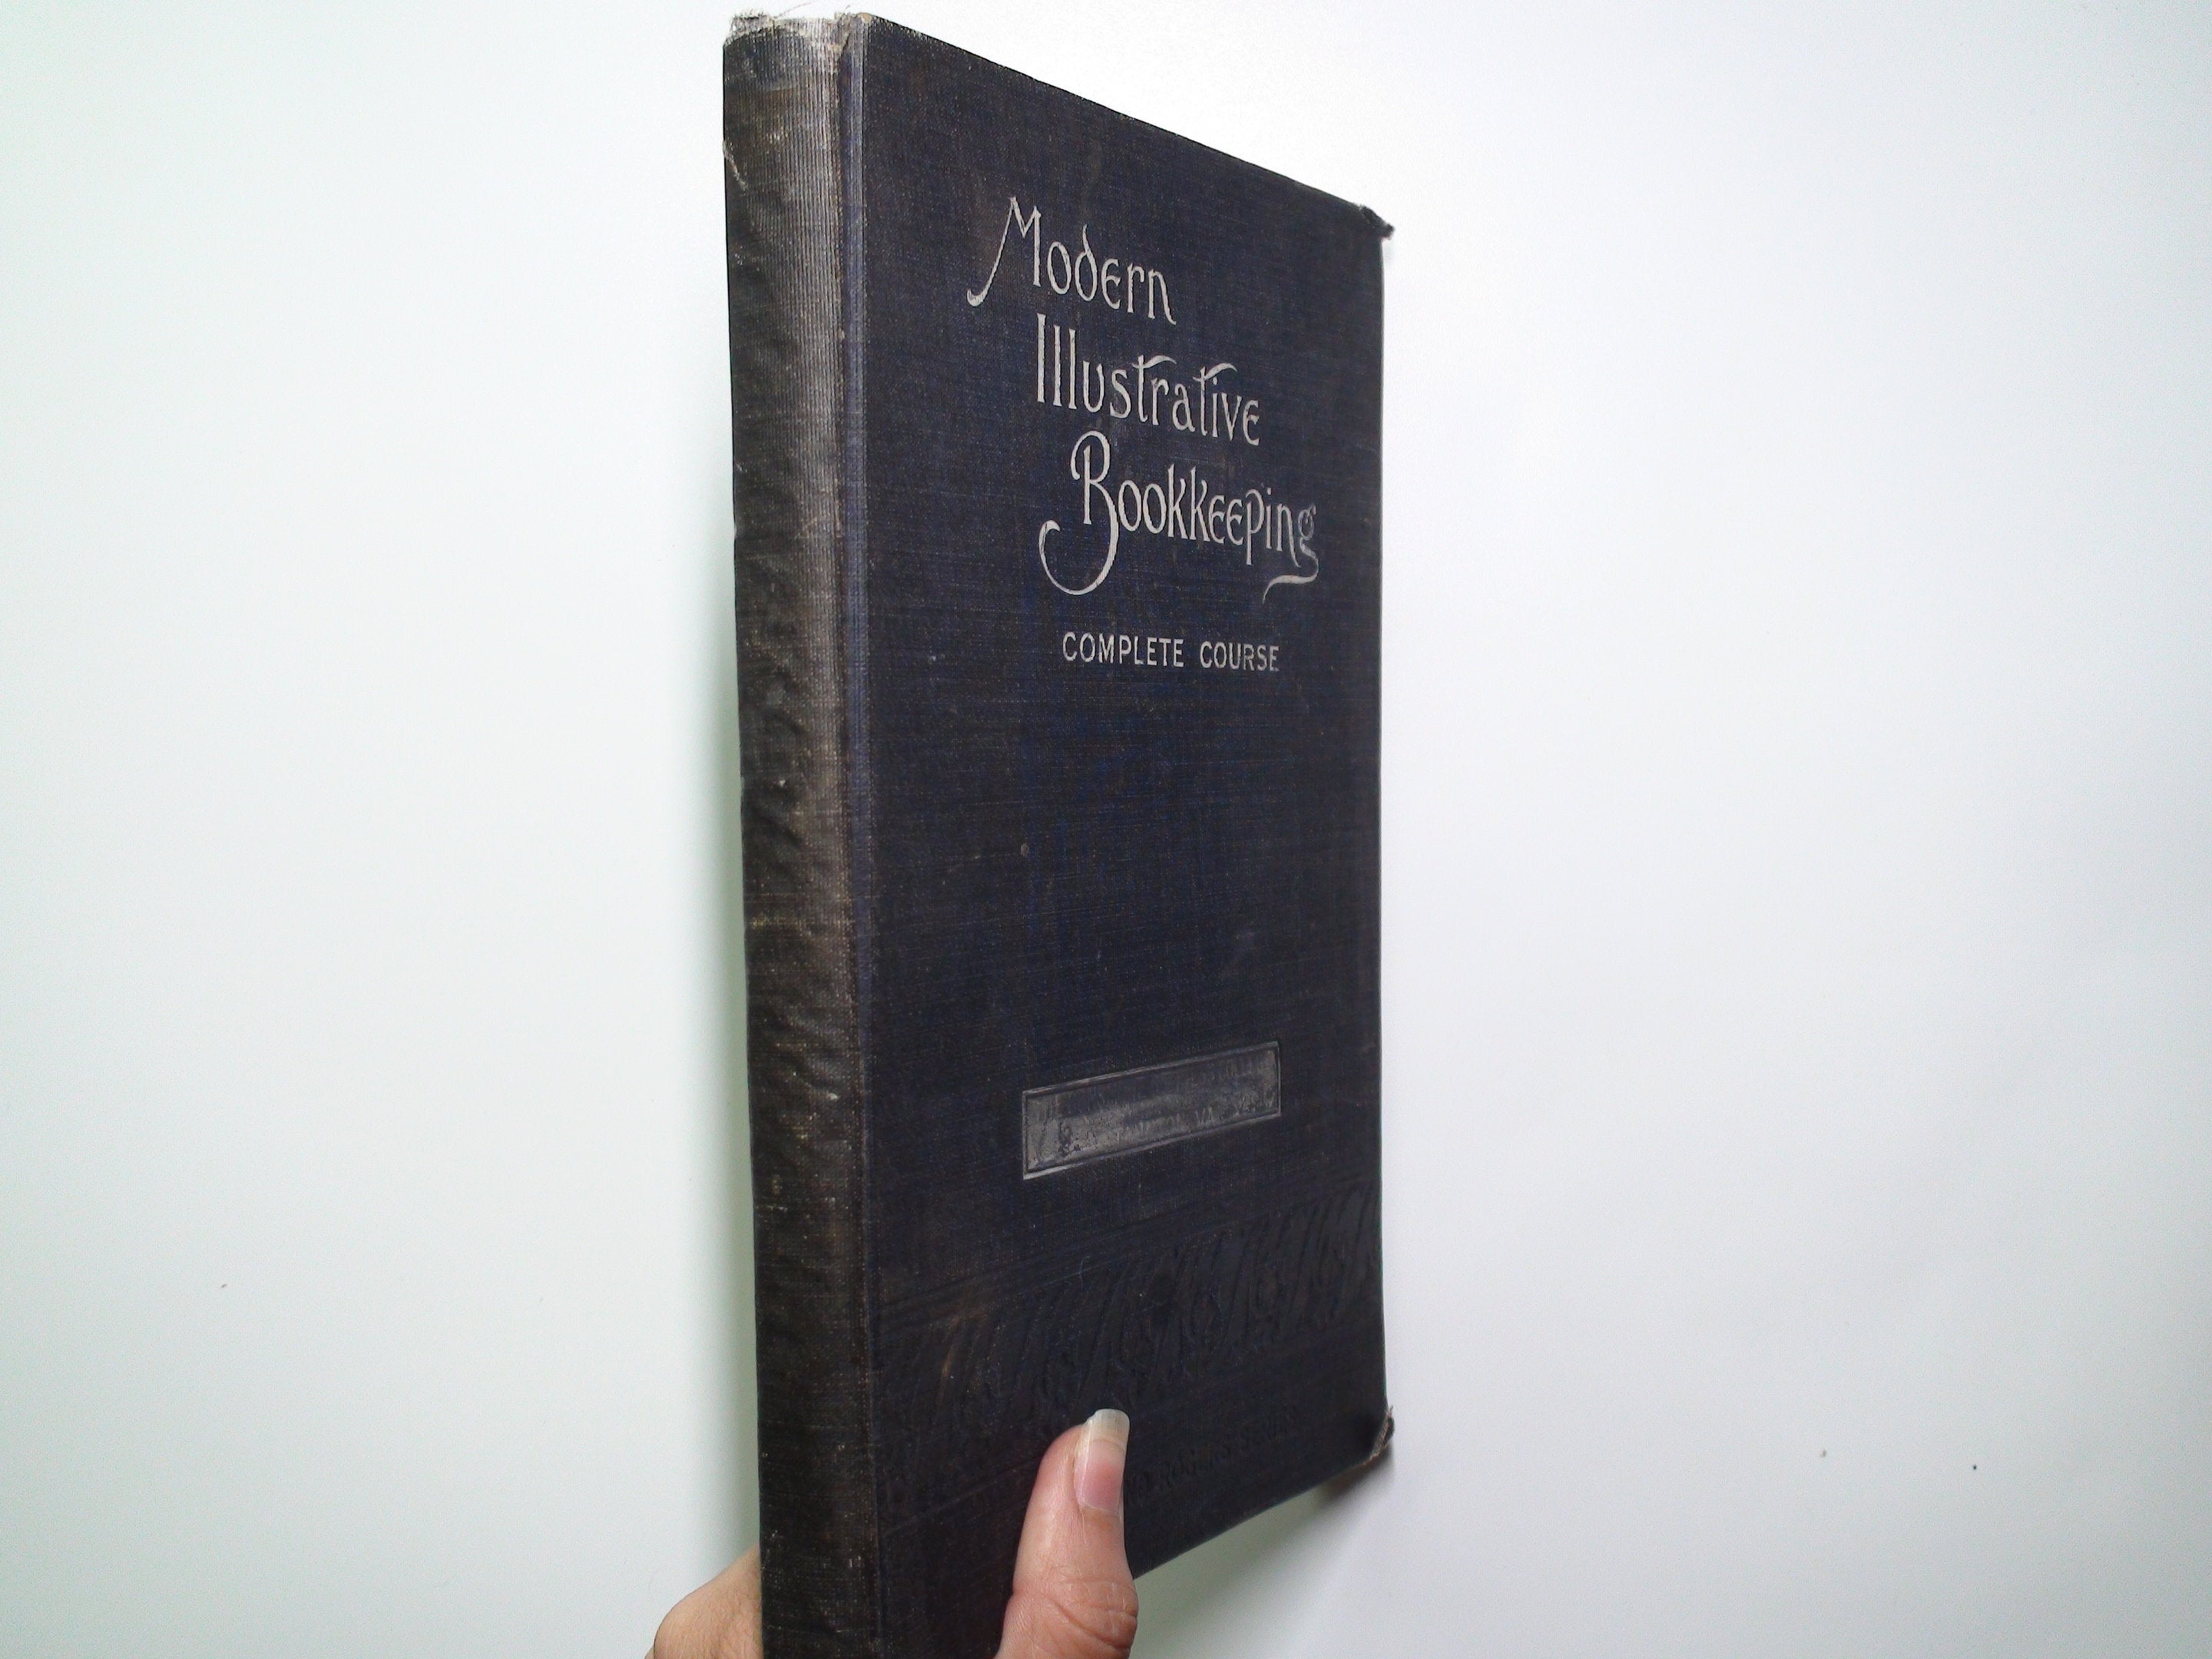 Modern Illustrative Bookkeeping, Complete Course, Illustrated, 1st Ed, 1901